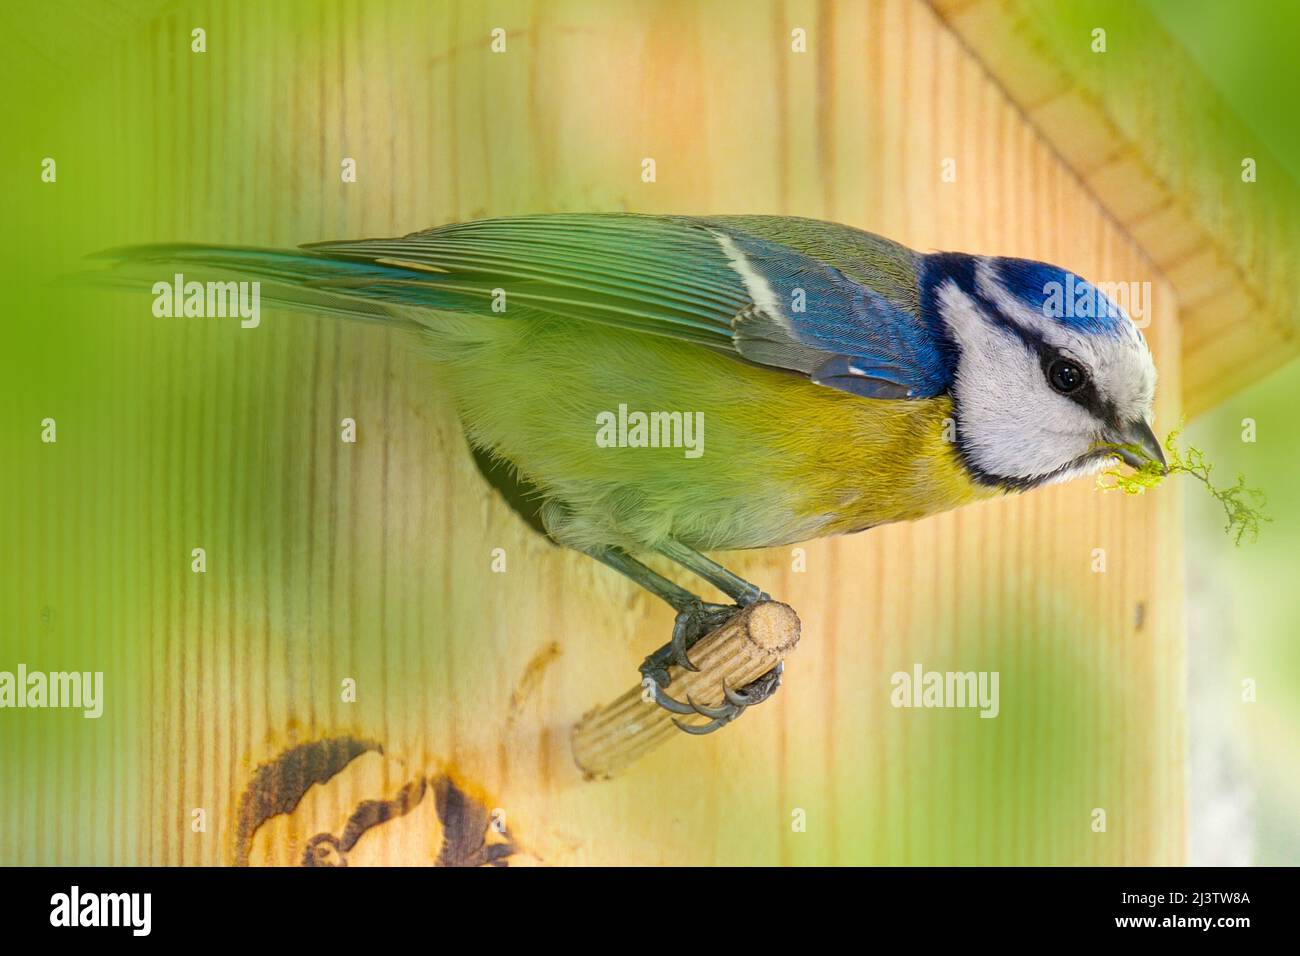 Blue tit builds a nest in the nest box. Couple of Eurasian blue tit preparing for brood, builds a nest of moss, close up view of bird. Stock Photo